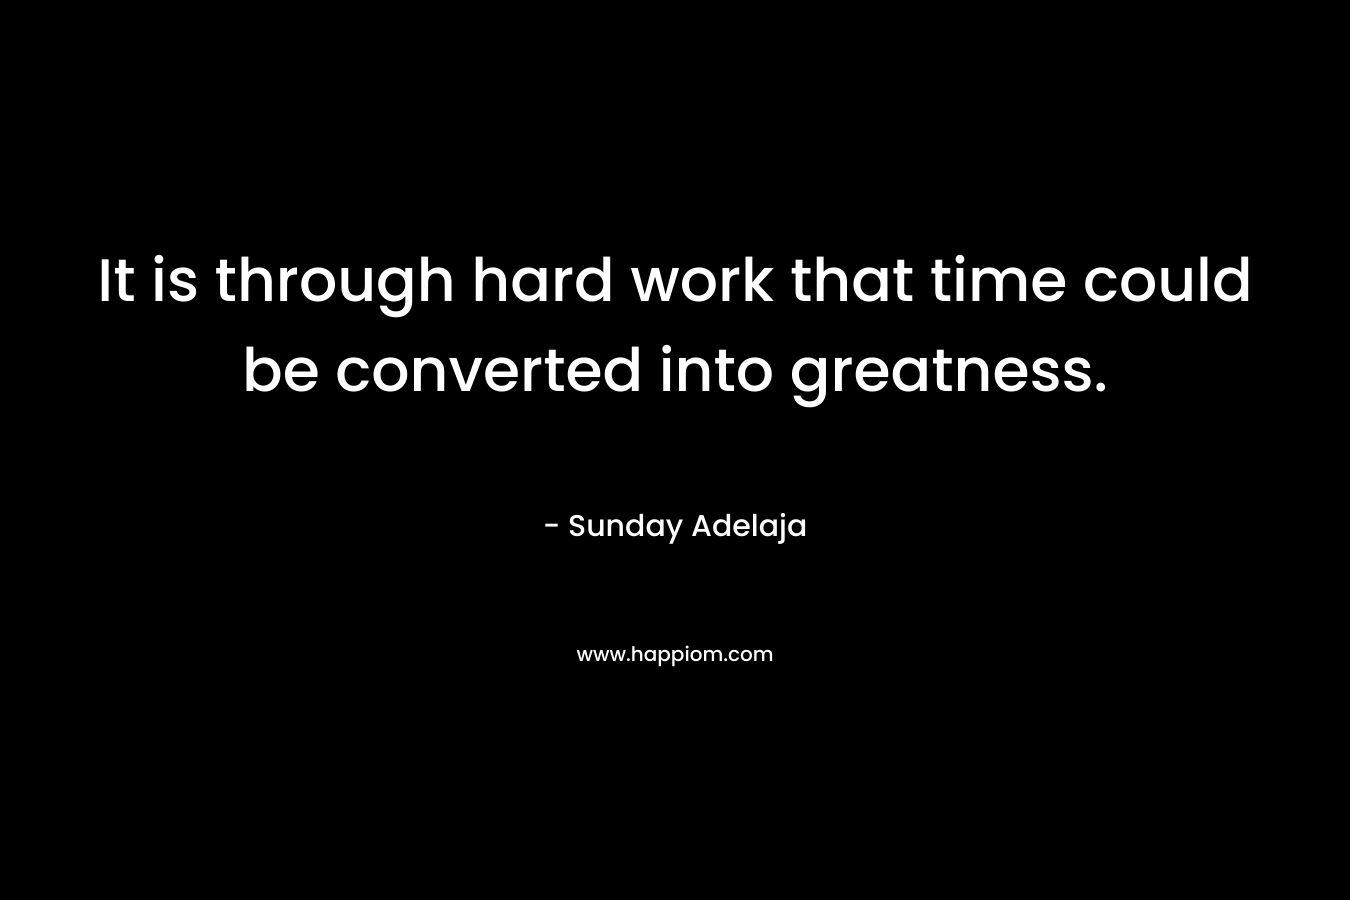 It is through hard work that time could be converted into greatness.